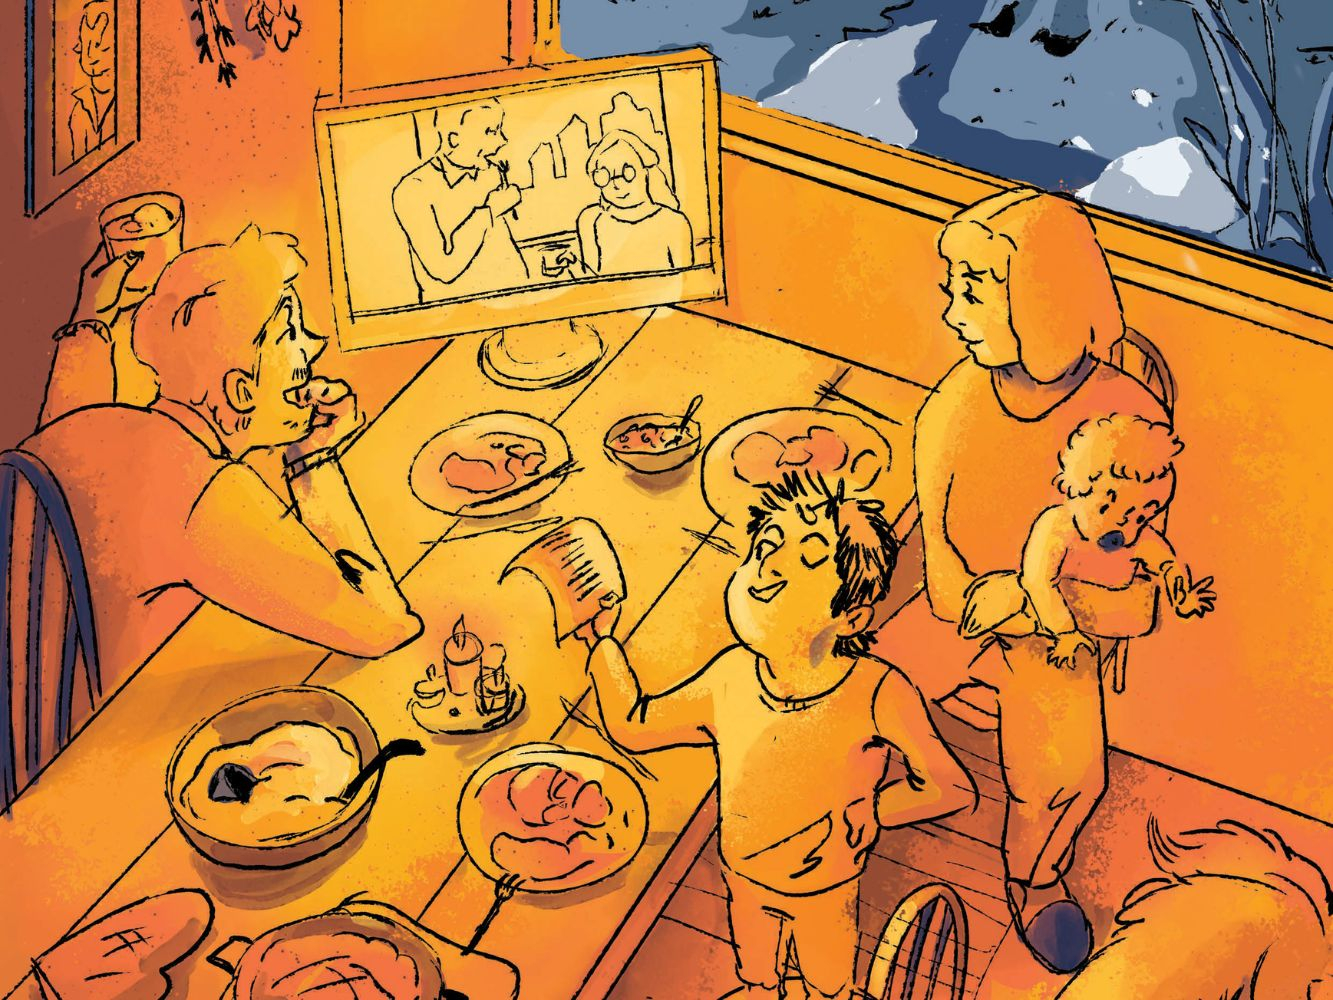 Artwork by Kregzdyte Ramune, family at dinner table full of plates watching television